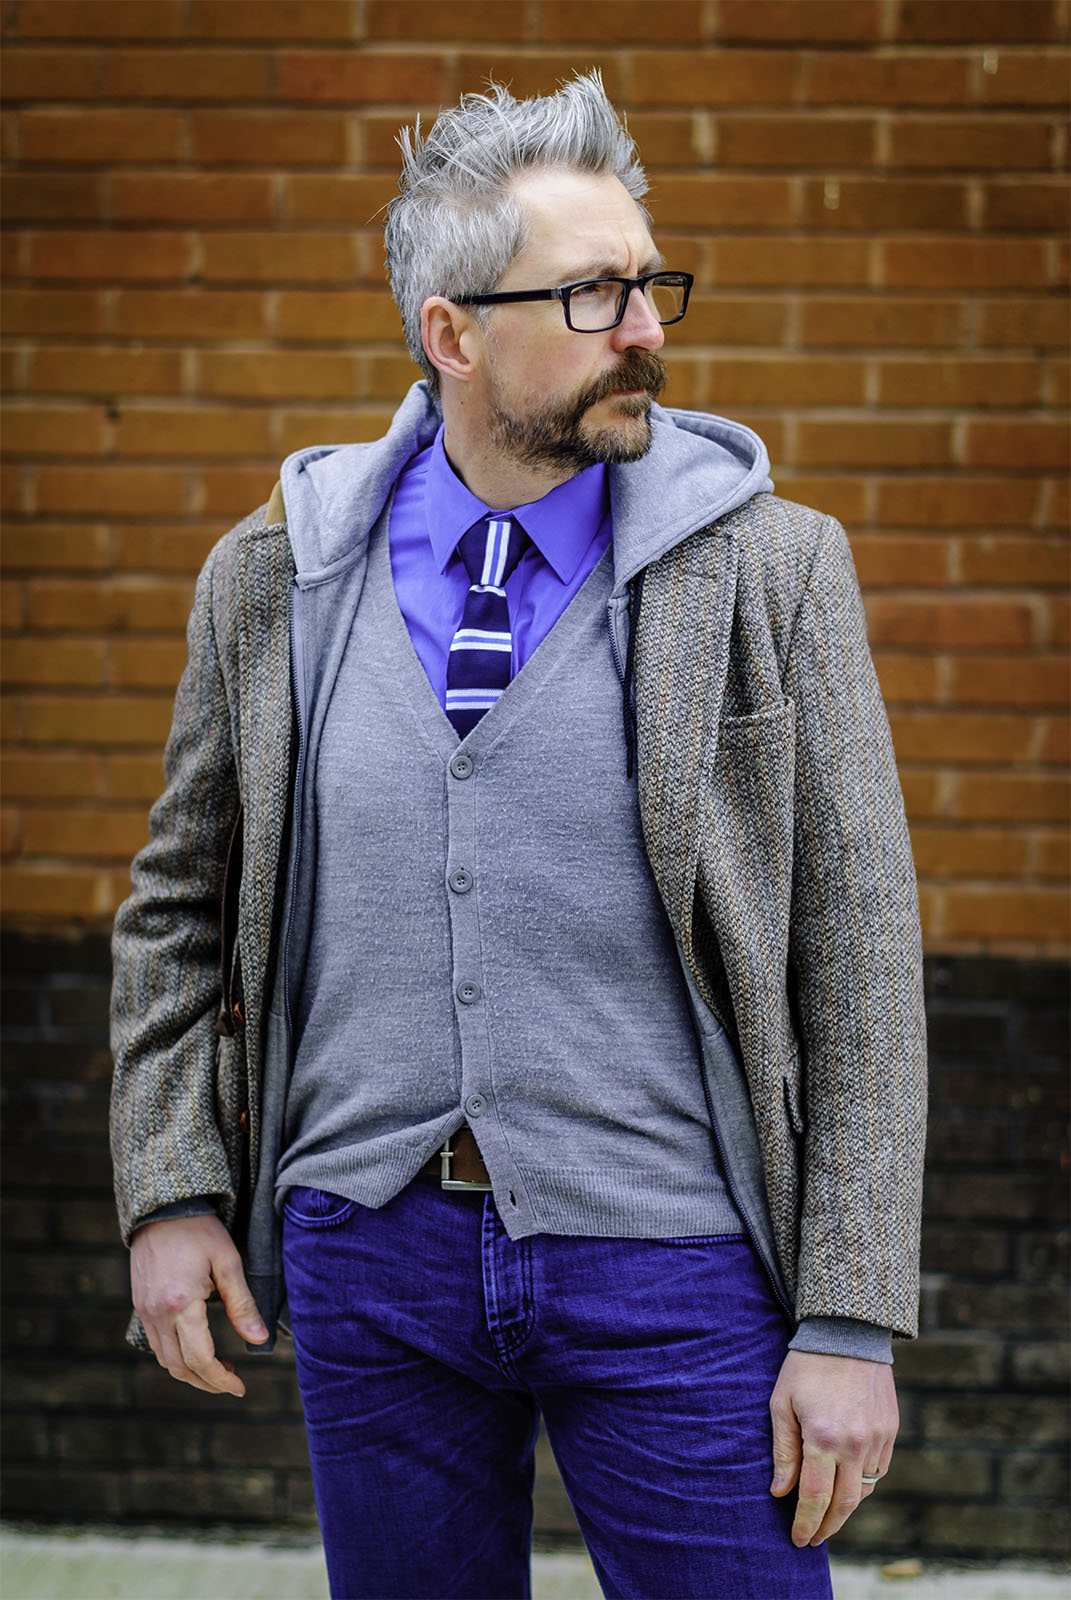 A layered smart casual outfit: Striped tie \ dress shirt \ grey cardigan \ grey hoodie \ Harris tweed jacket \ jeans \ grey brogues | Silver Londoner, over 40 menswear